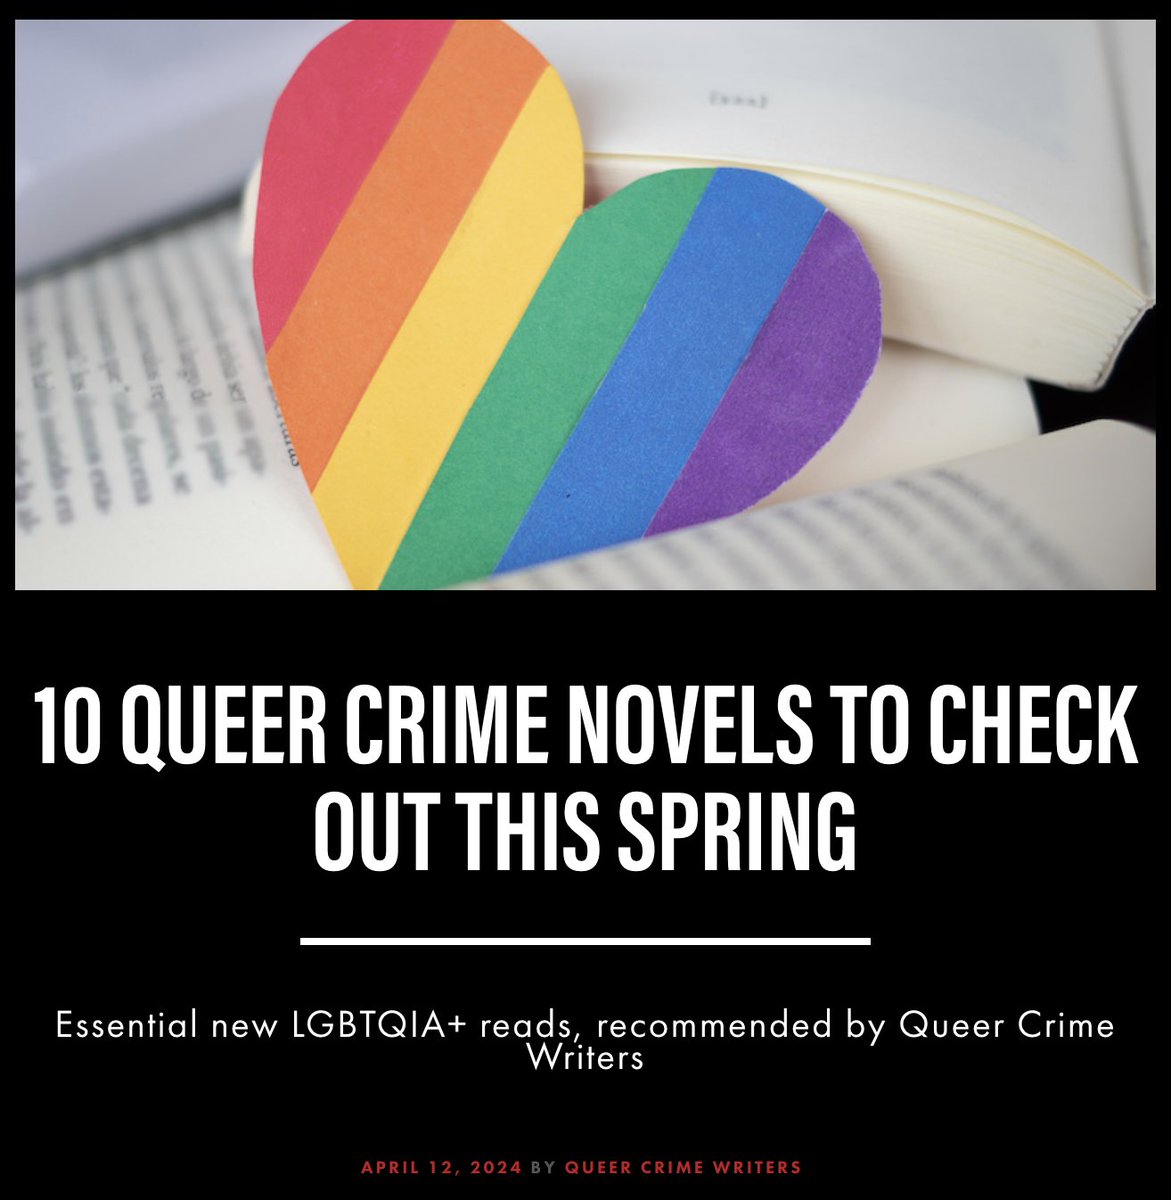 So pleased to share more great Queer Crime Writers you must read in our spring and early summer round-up ... and, hey, I'm on the list this time! I'm proud of this @QueerCrimeFic project and its partnership with @CrimeReads. crimereads.com/10-queer-crime…